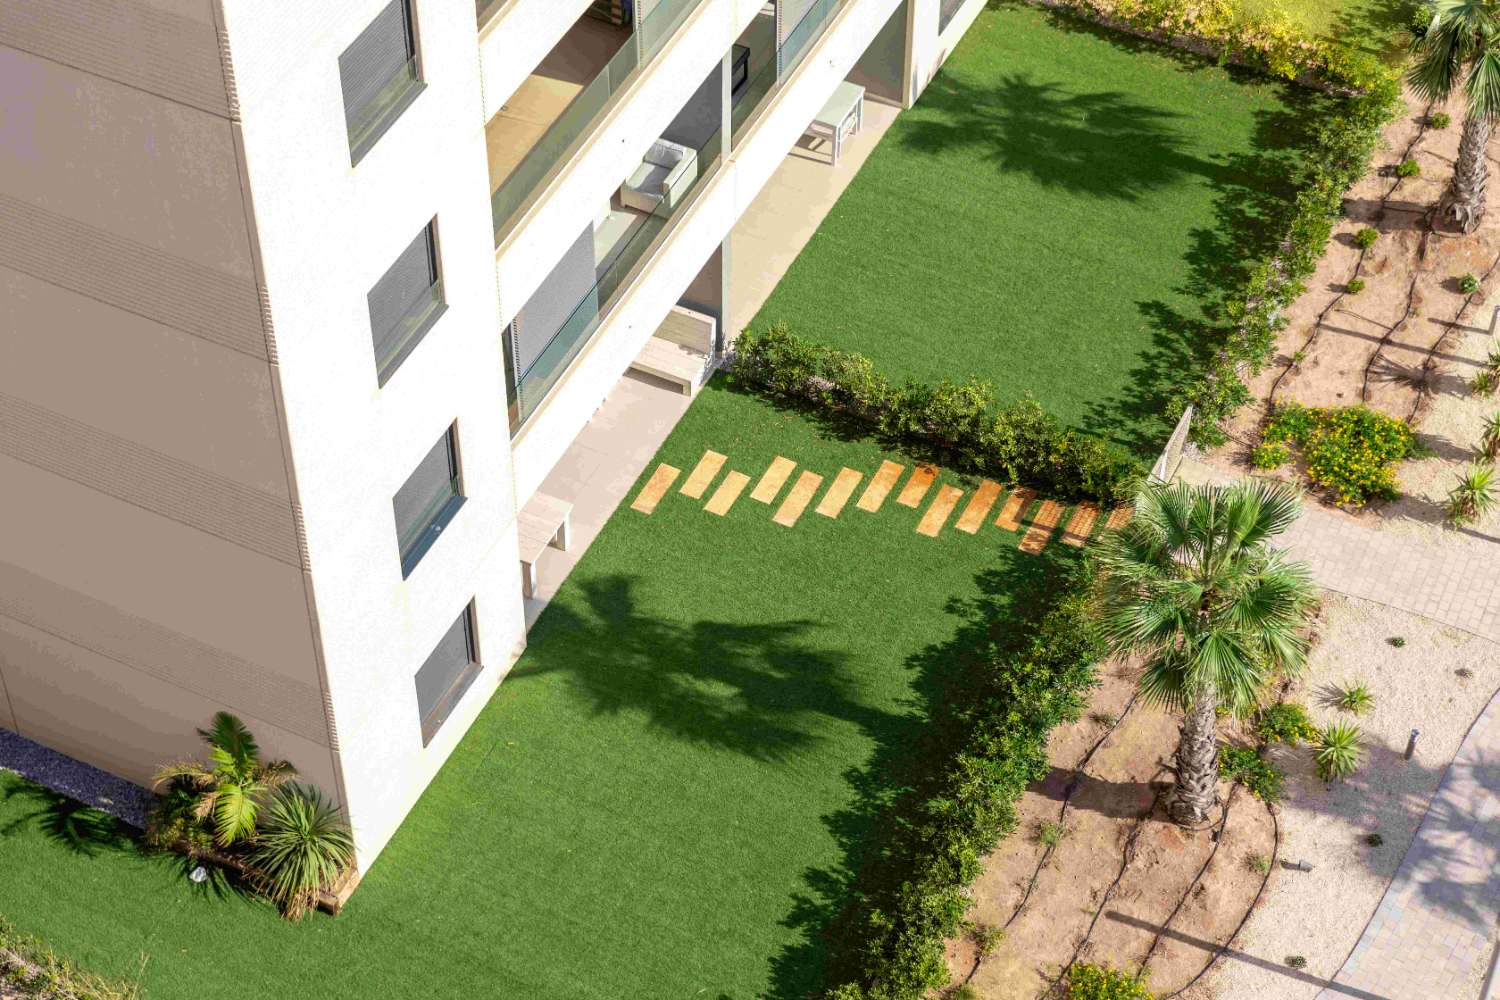 POSIDONIA RESIDENTIAL LUXURY APARTMENTS ON THE 1ST LINE IN PUNTA PRIMA